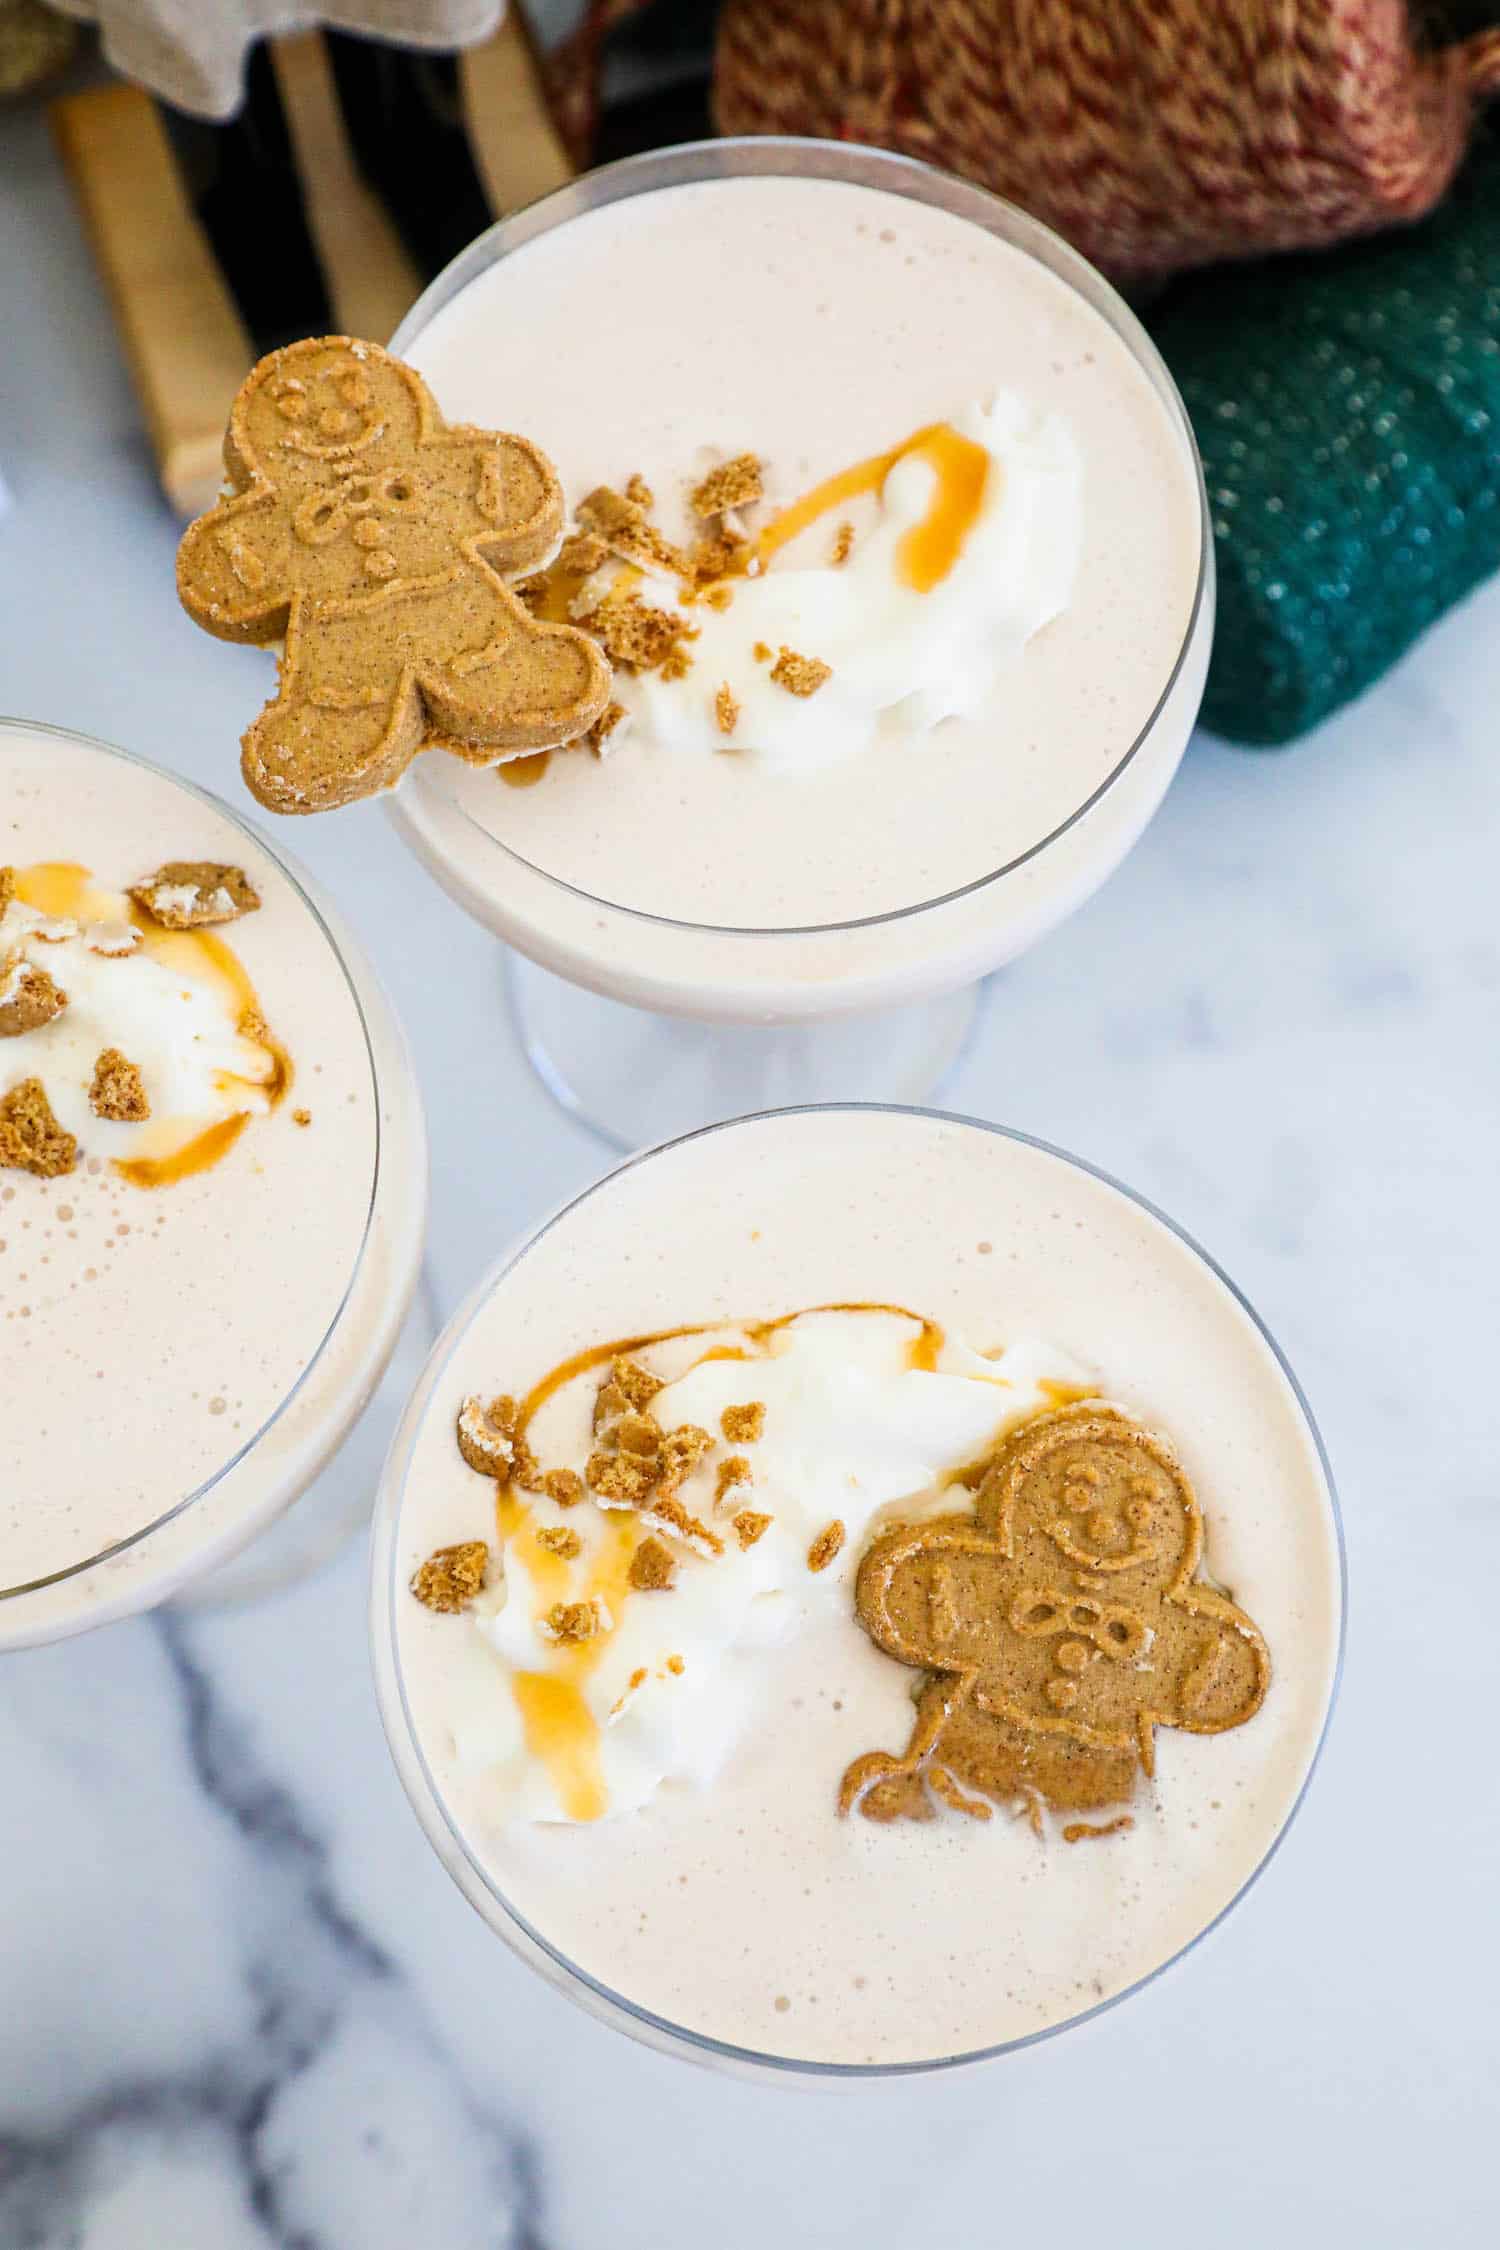 Indulge in a delightful gingerbread martini garnished with a dollop of whipped cream and accompanied by delectable gingerbread cookies.